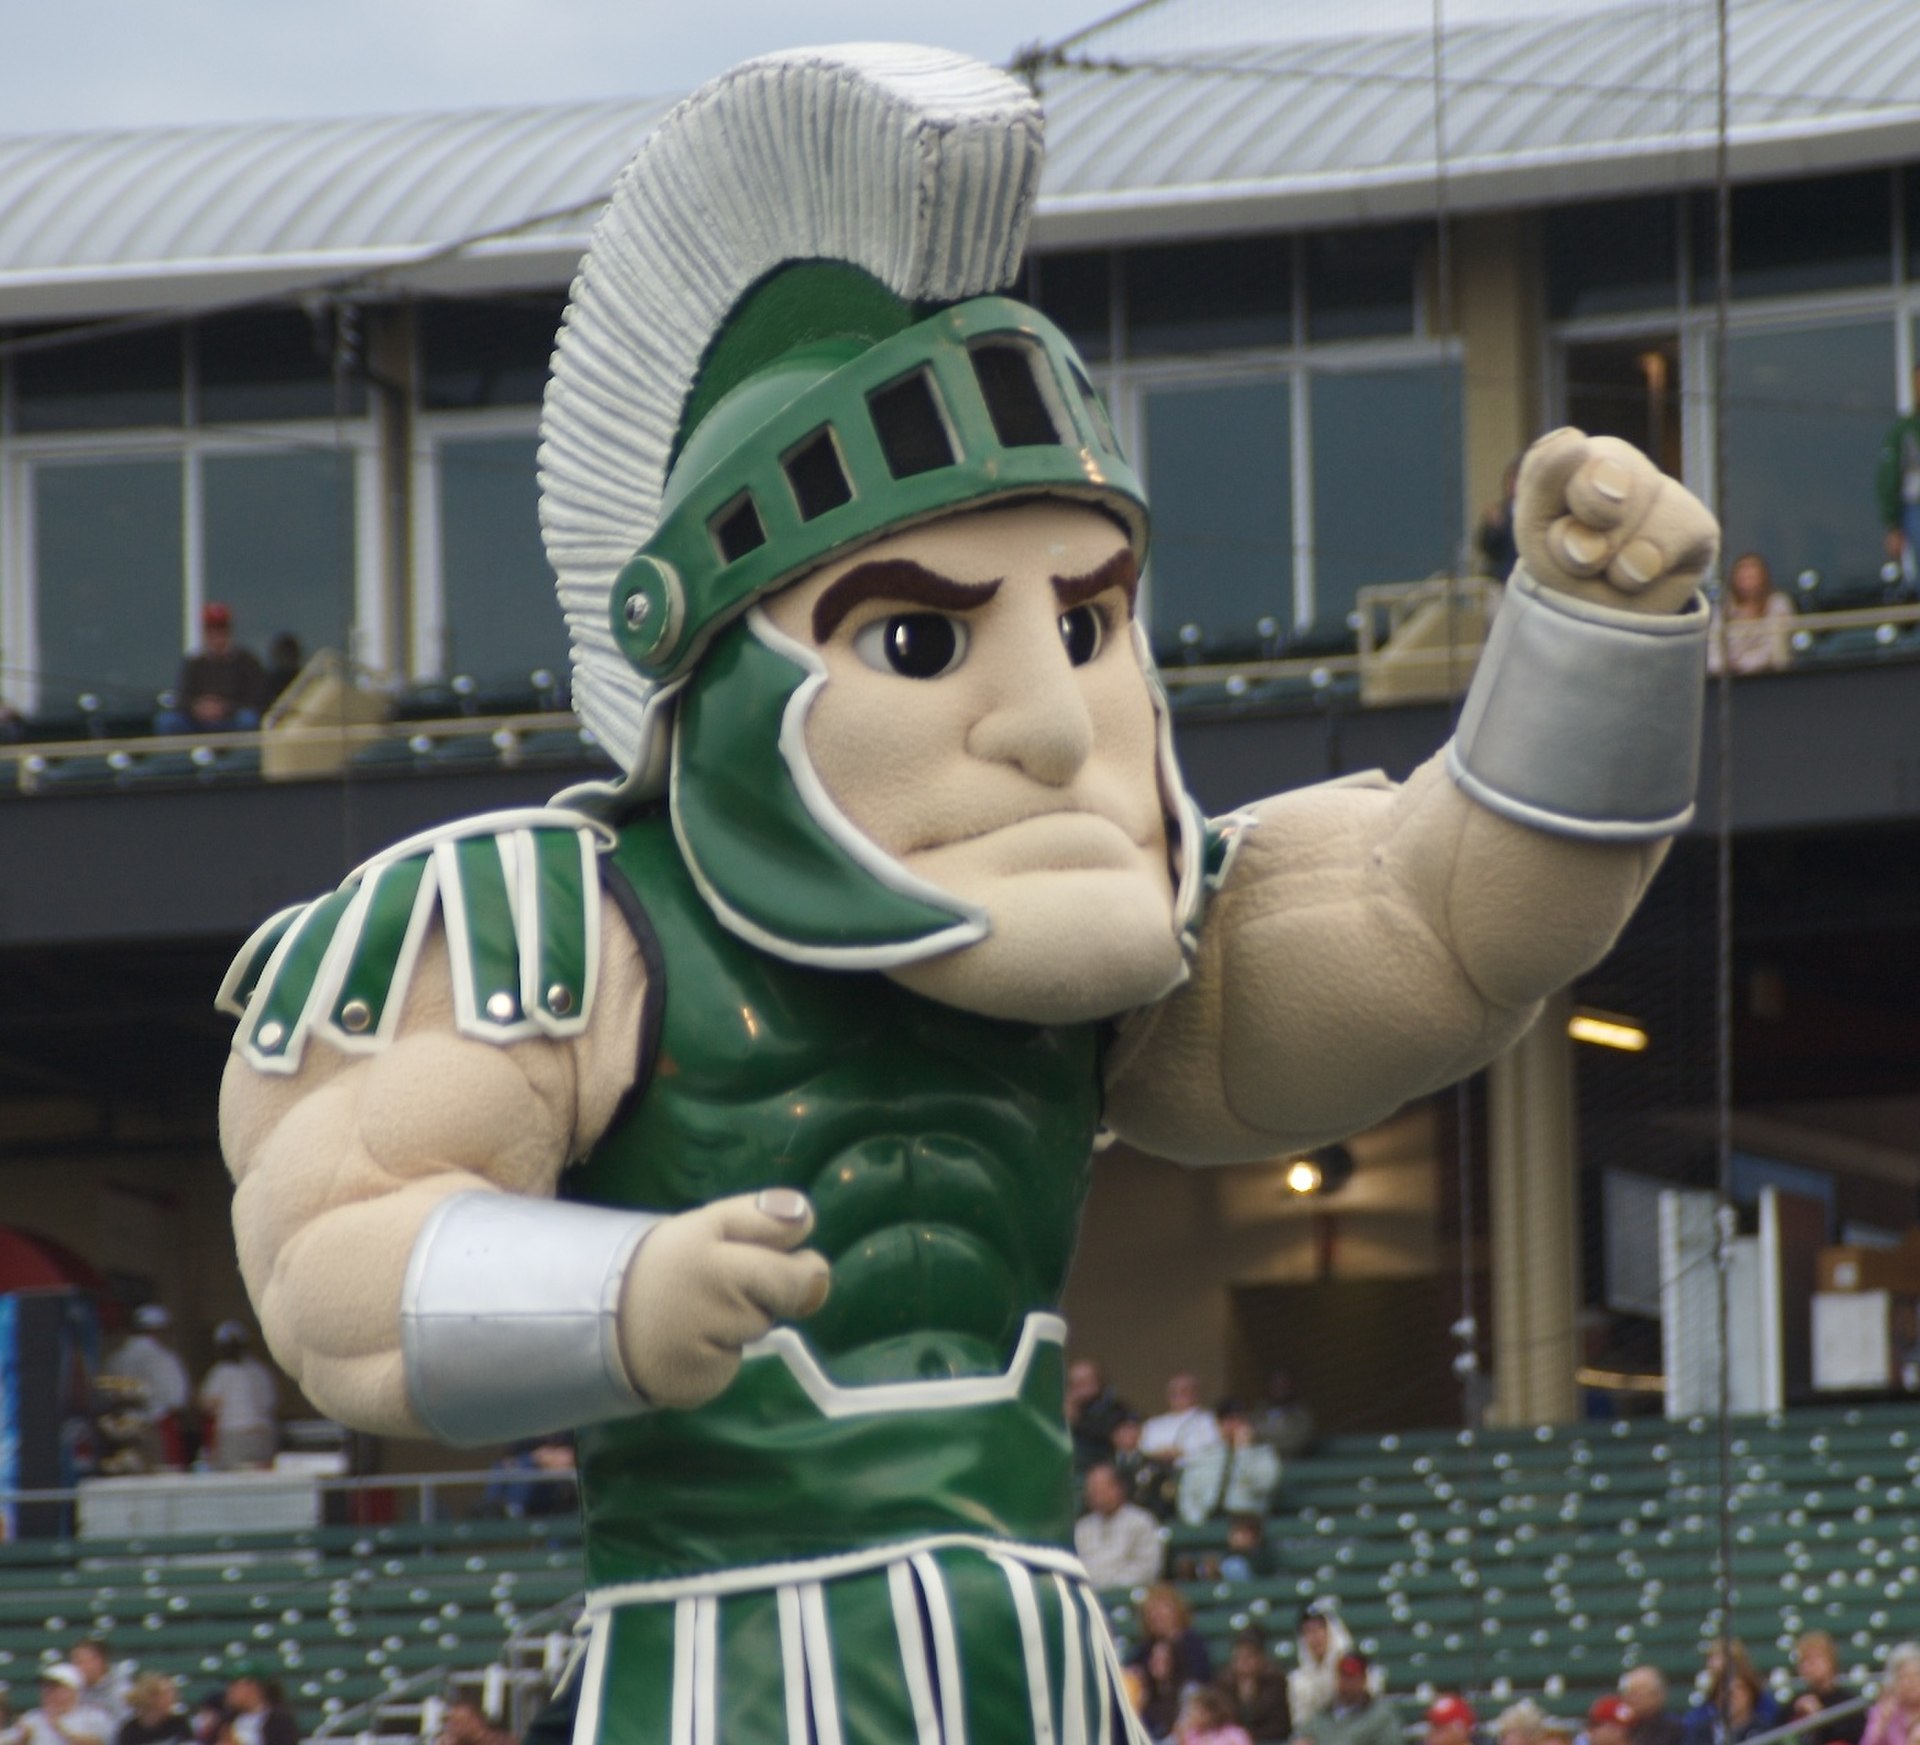 1920px-Sparty.jpg